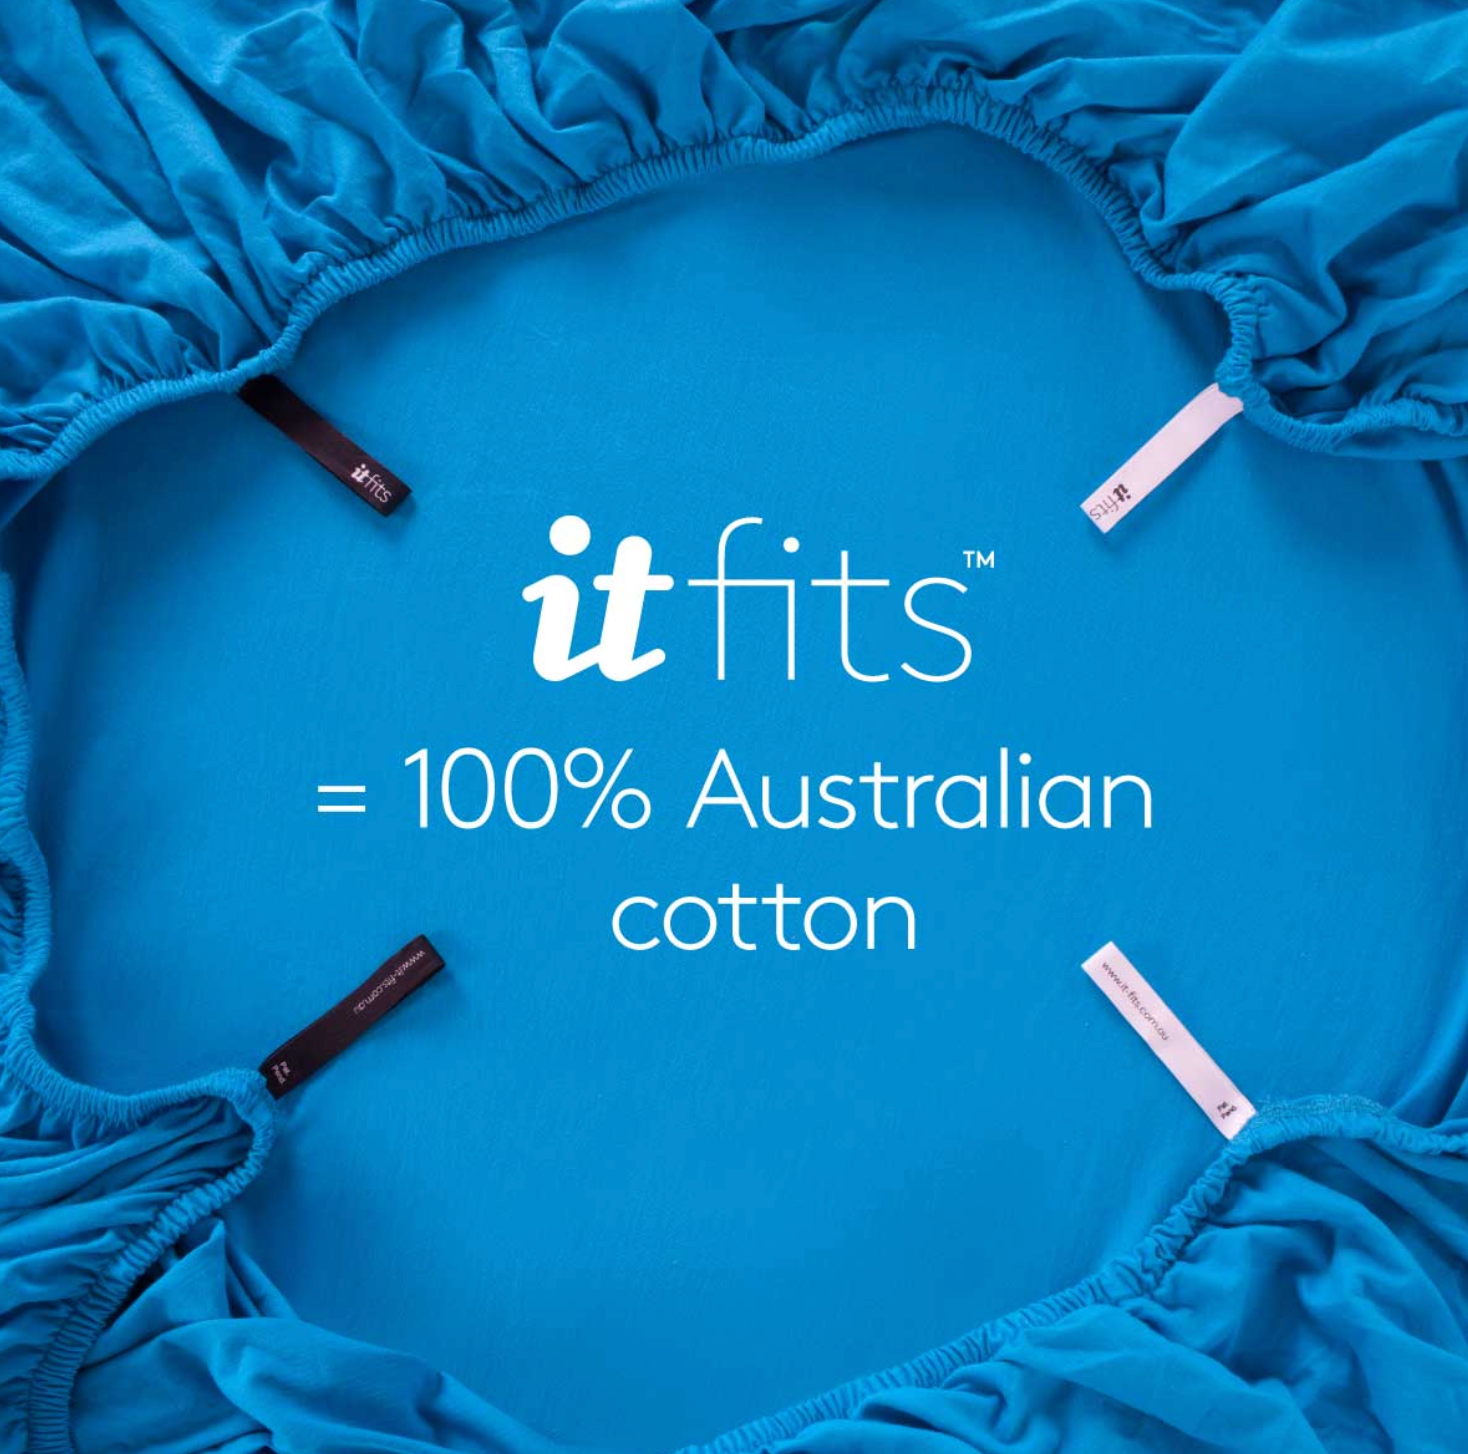 Fitted Sheet | Why Cotton Is The Best Option For Fitted Sheet And Methods For Making Fitted Sheet Using Cotton